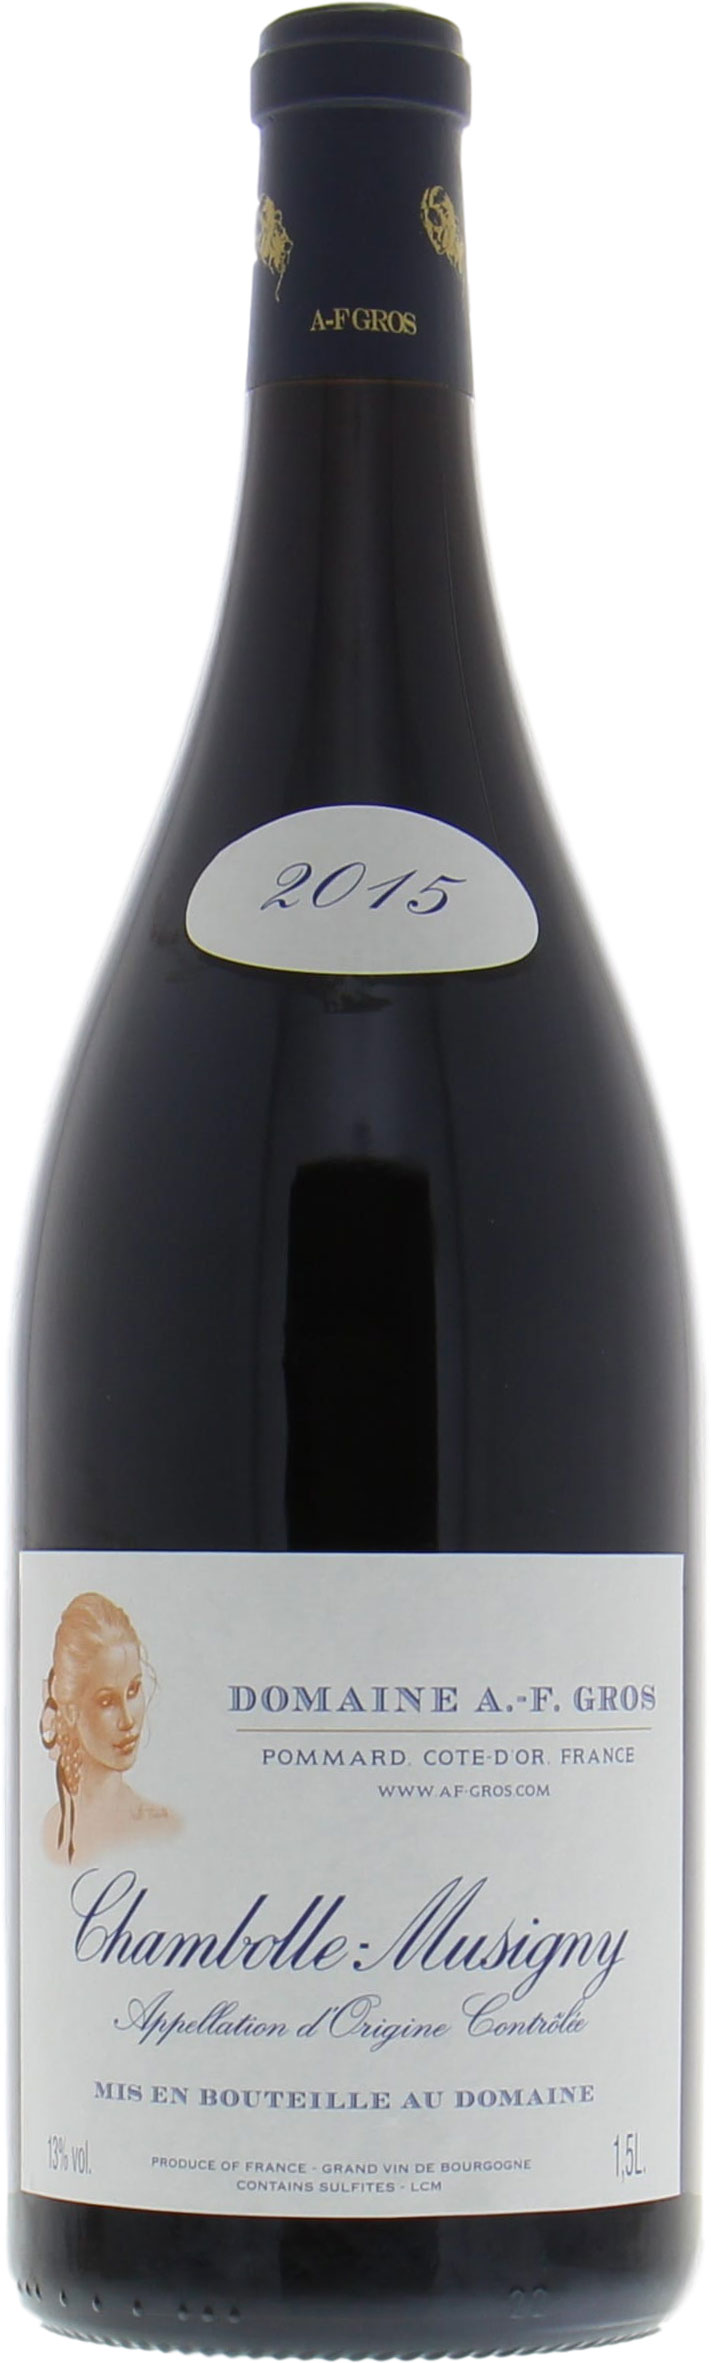 AF Gros - Chambolle Musigny 2015